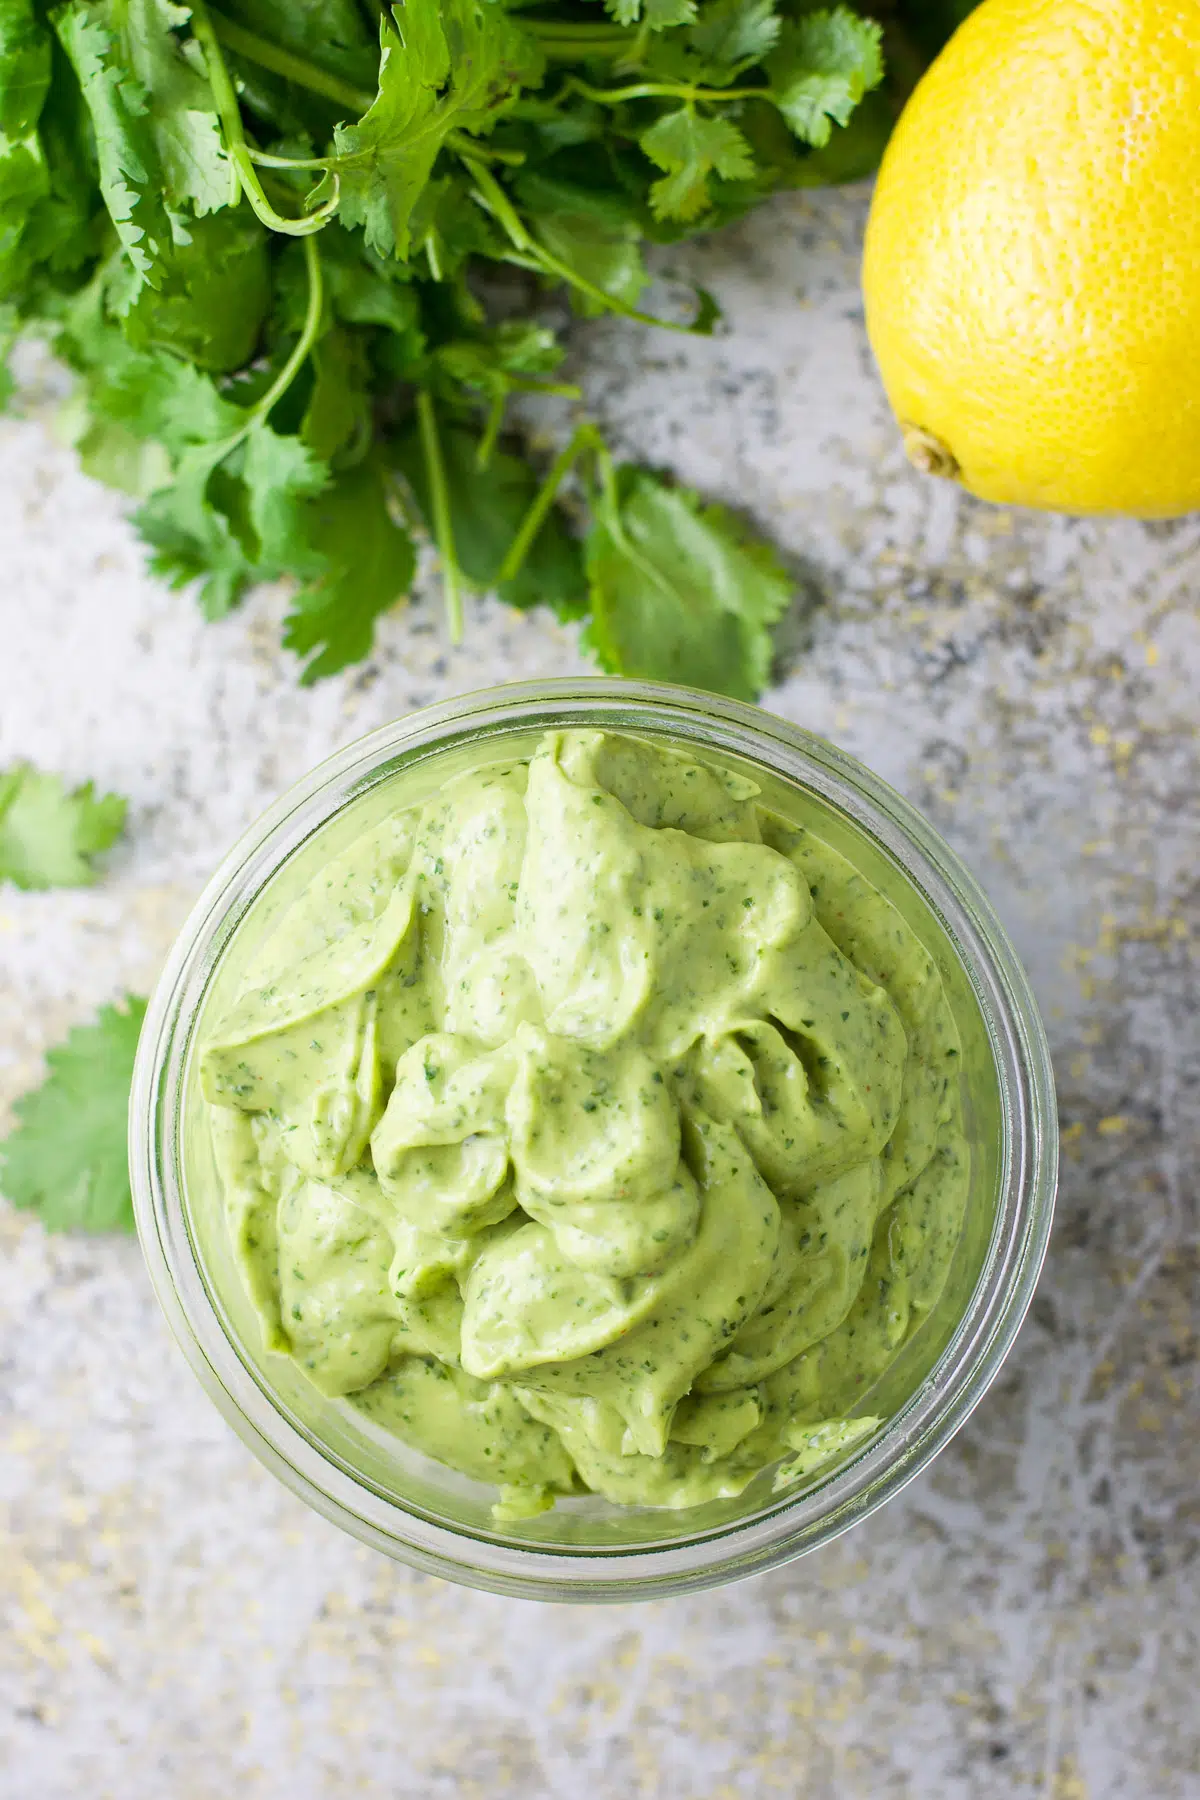 Overhead view of the avocado sauce with lemon and cilantro on the table